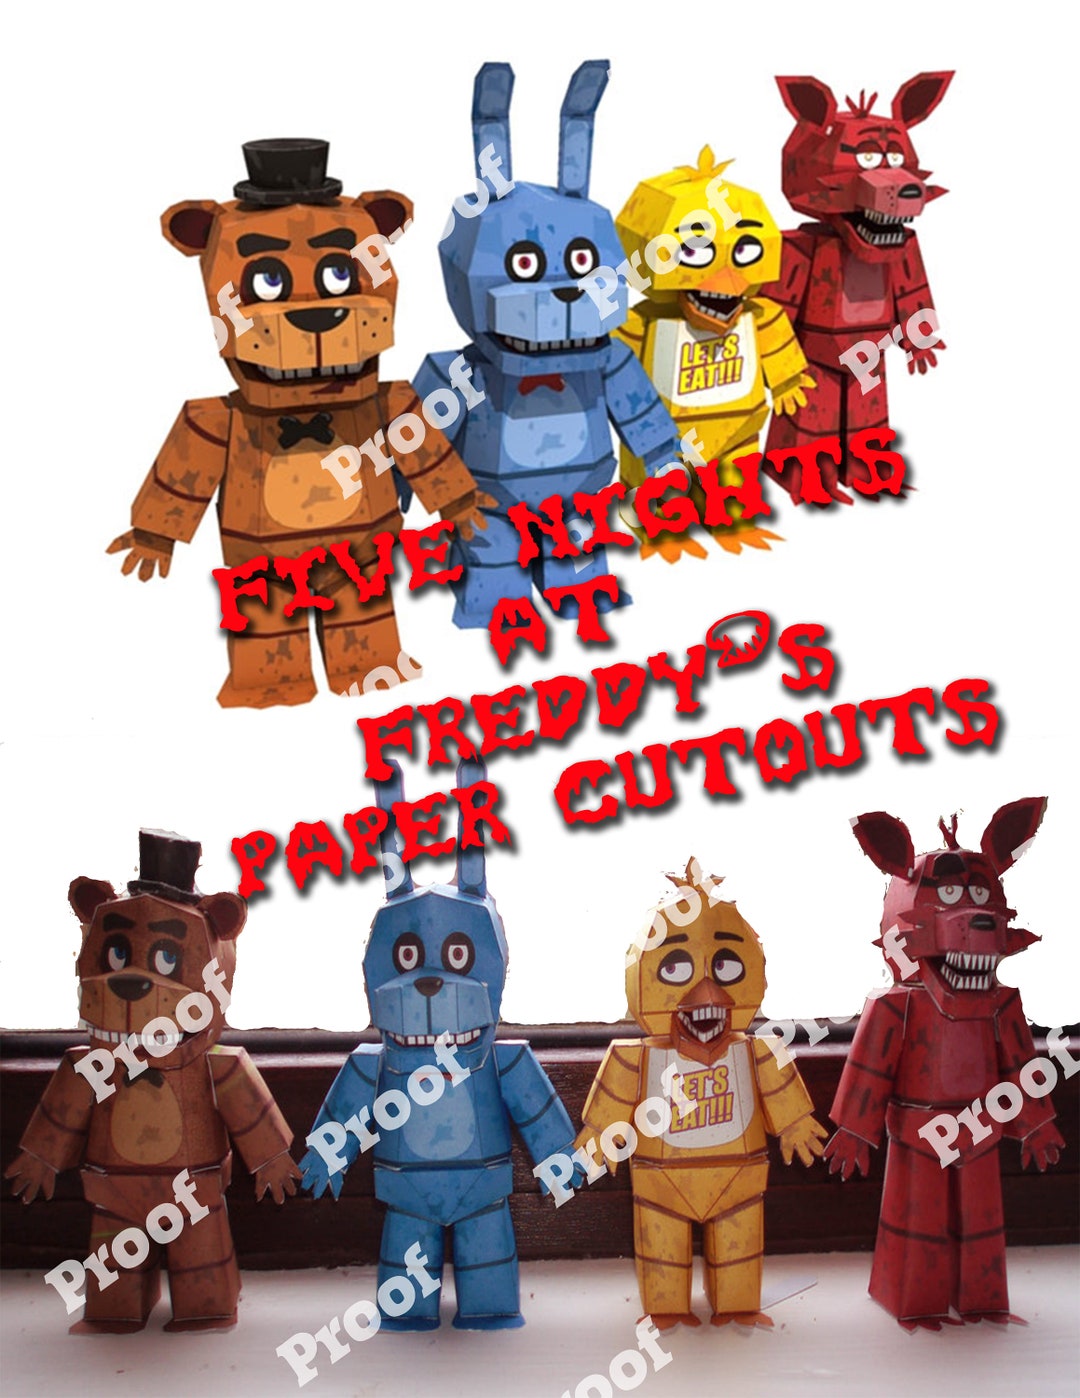 How could FNaF animatronics be built by the blueprints from the